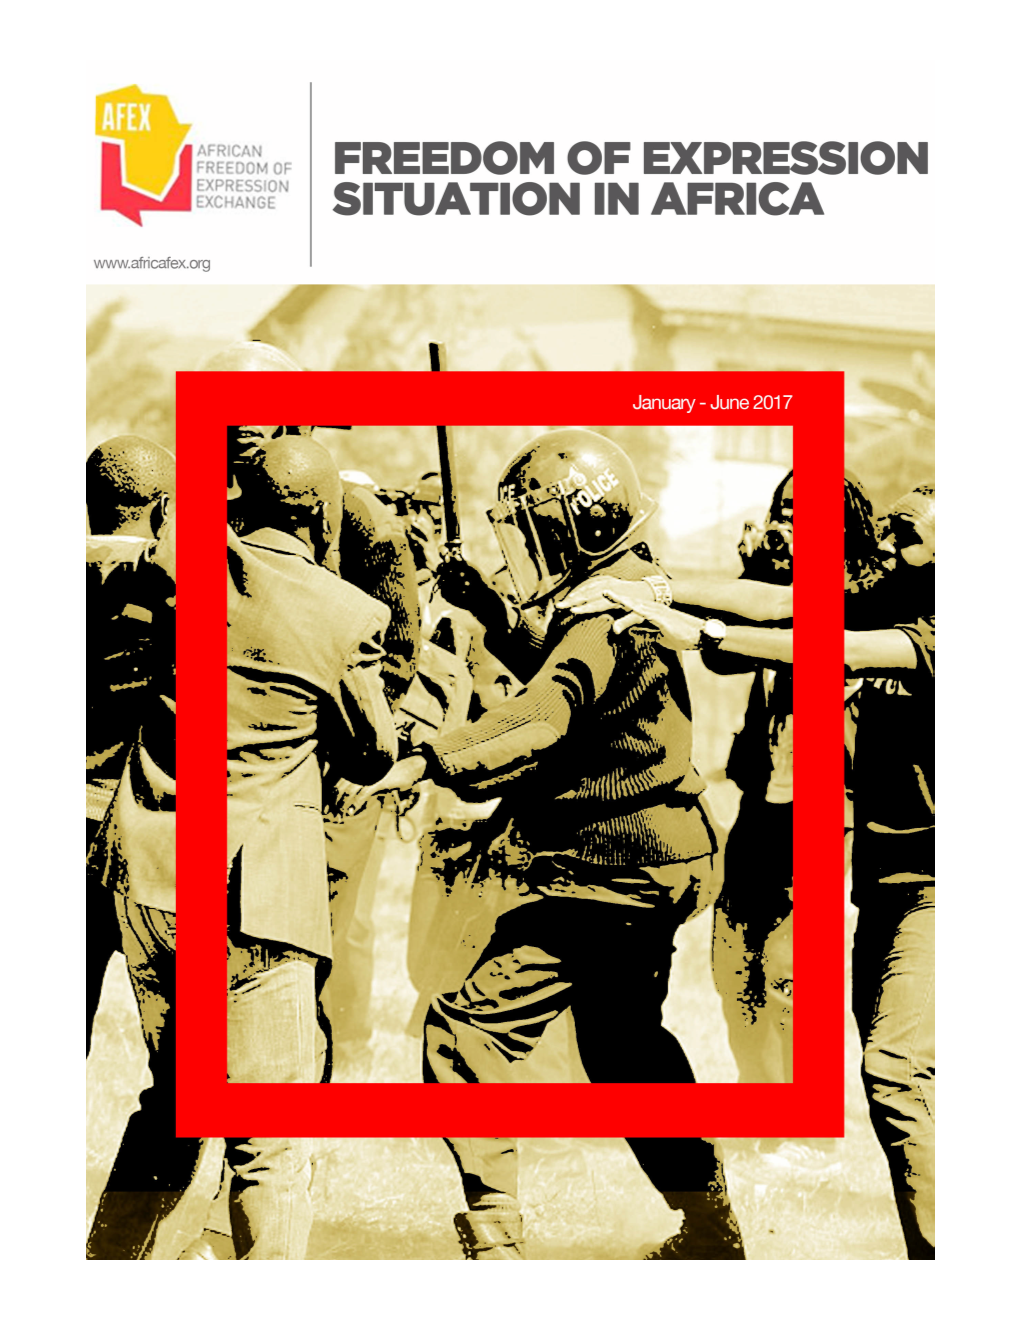 AFEX) Is a Continental Network of Some of the Leading Freedom of Expression and Media Rights Groups in Africa That Seeks to Promote Free Speech and Human Rights